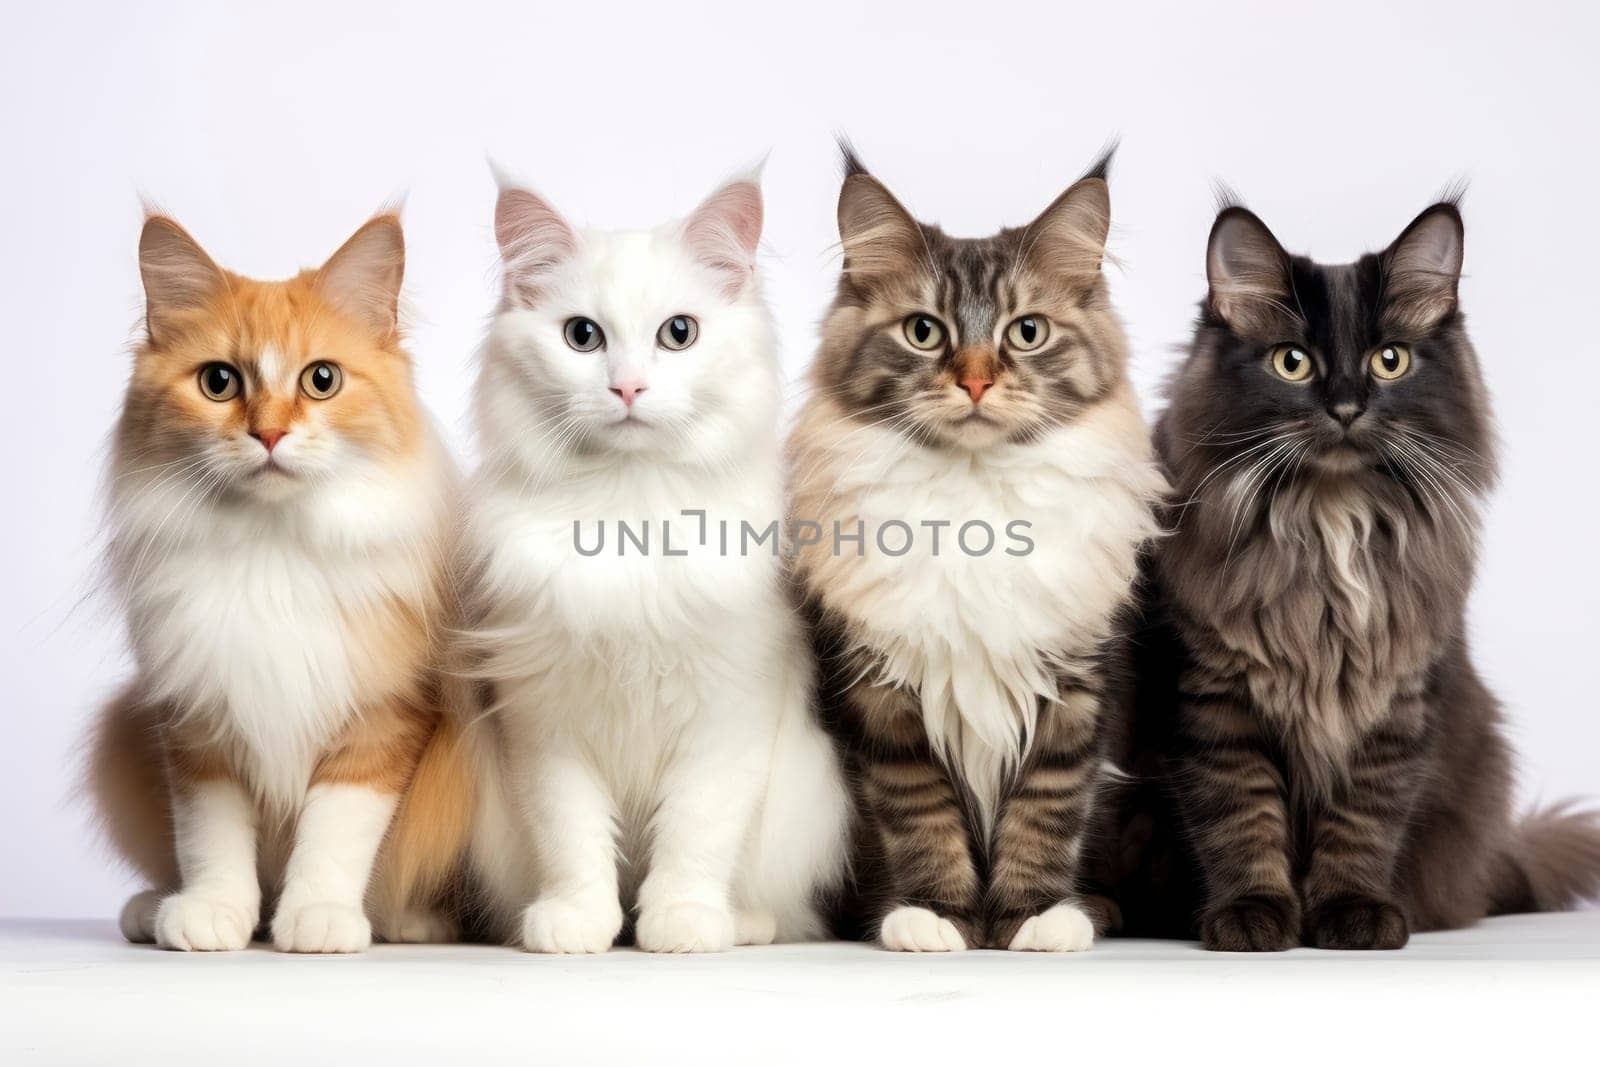 Four Maine Coon cats sitting side by side, displaying their fluffy fur, diverse colors, and attentive expressions.